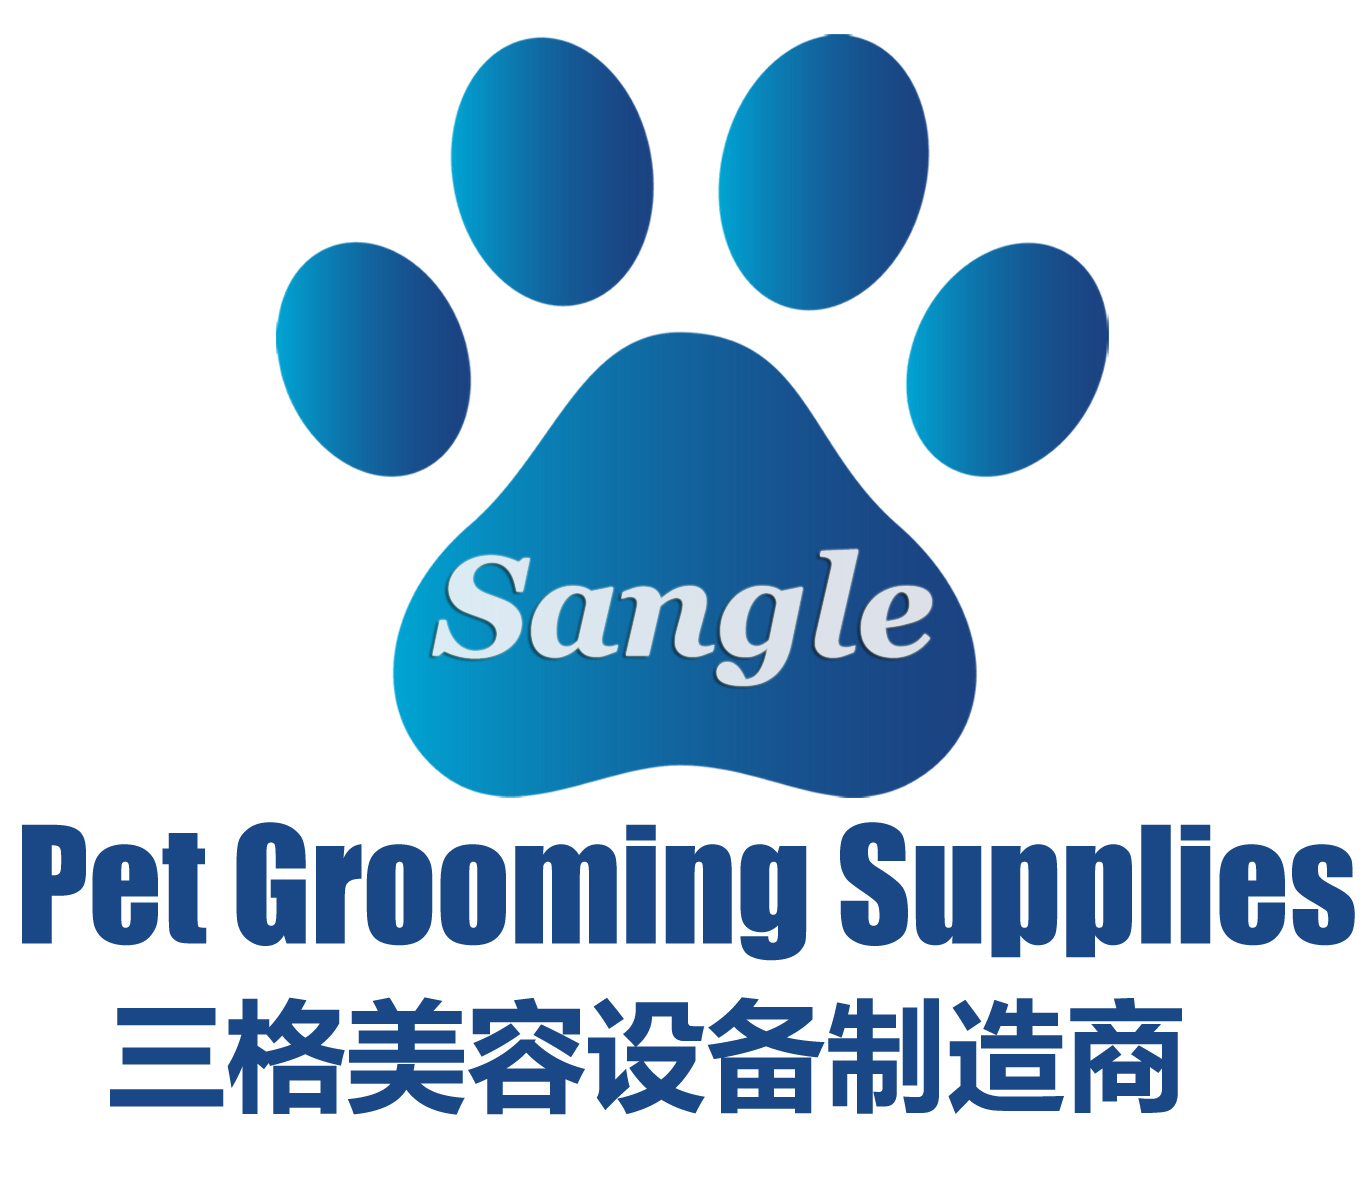 Sangle Pet Grooming&Medical Supplies Factory Co.,Ltd